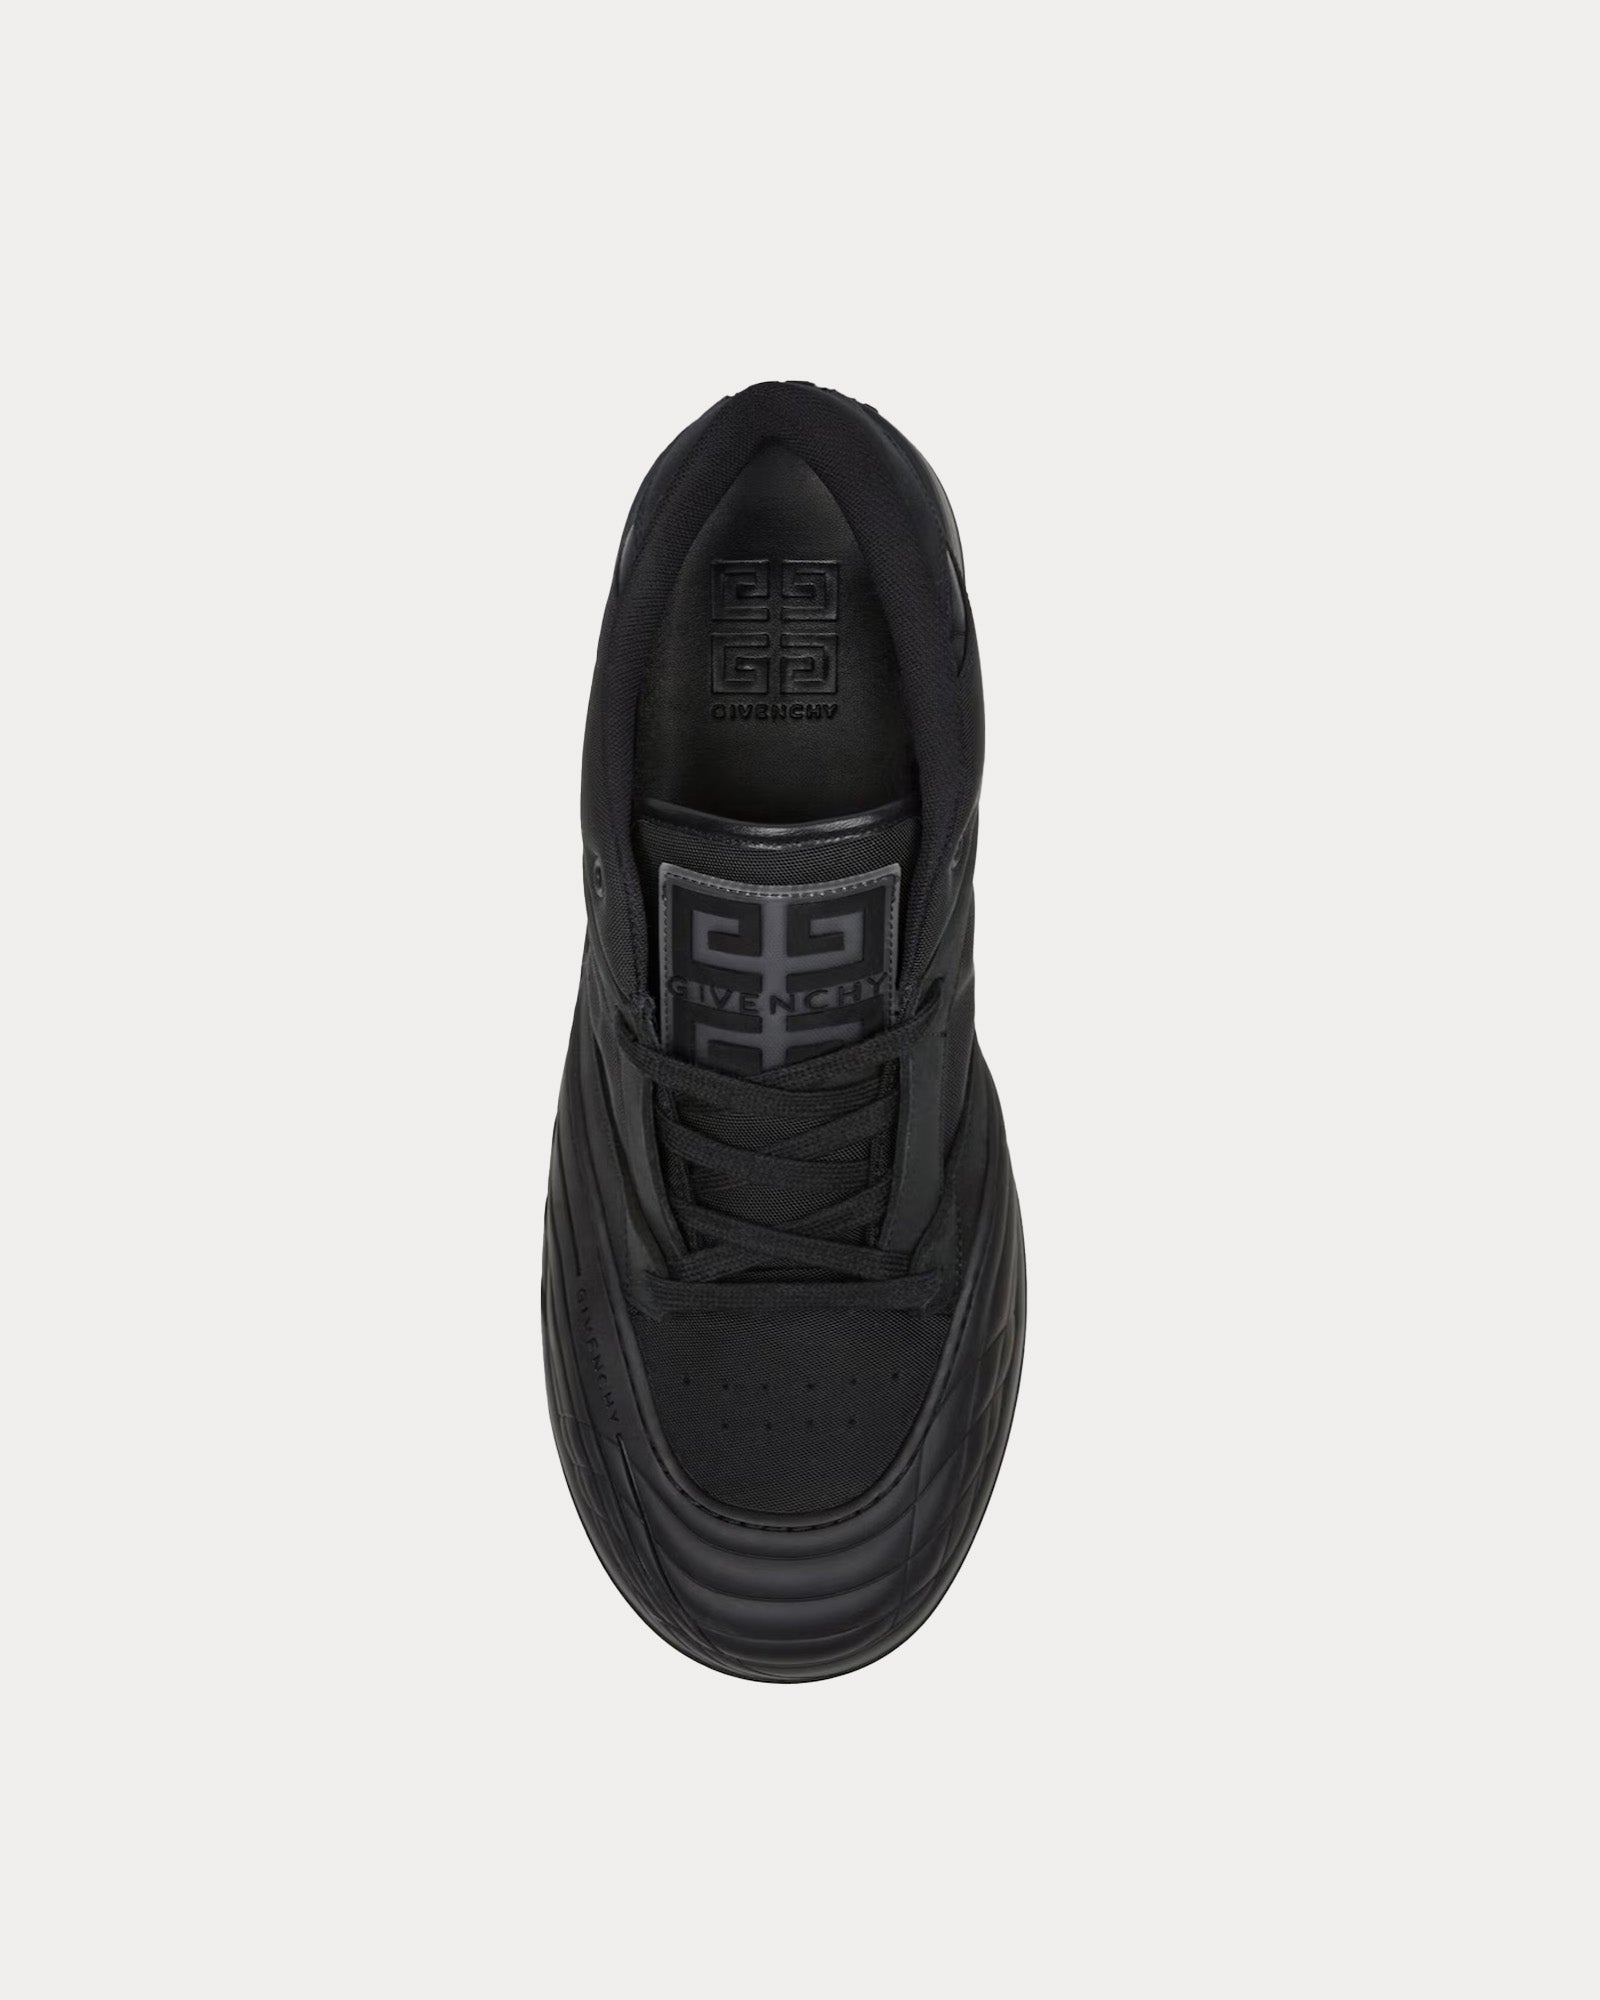 Givenchy - Skate Nubuck & Synthetic Fiber Black Mid Top Sneakers